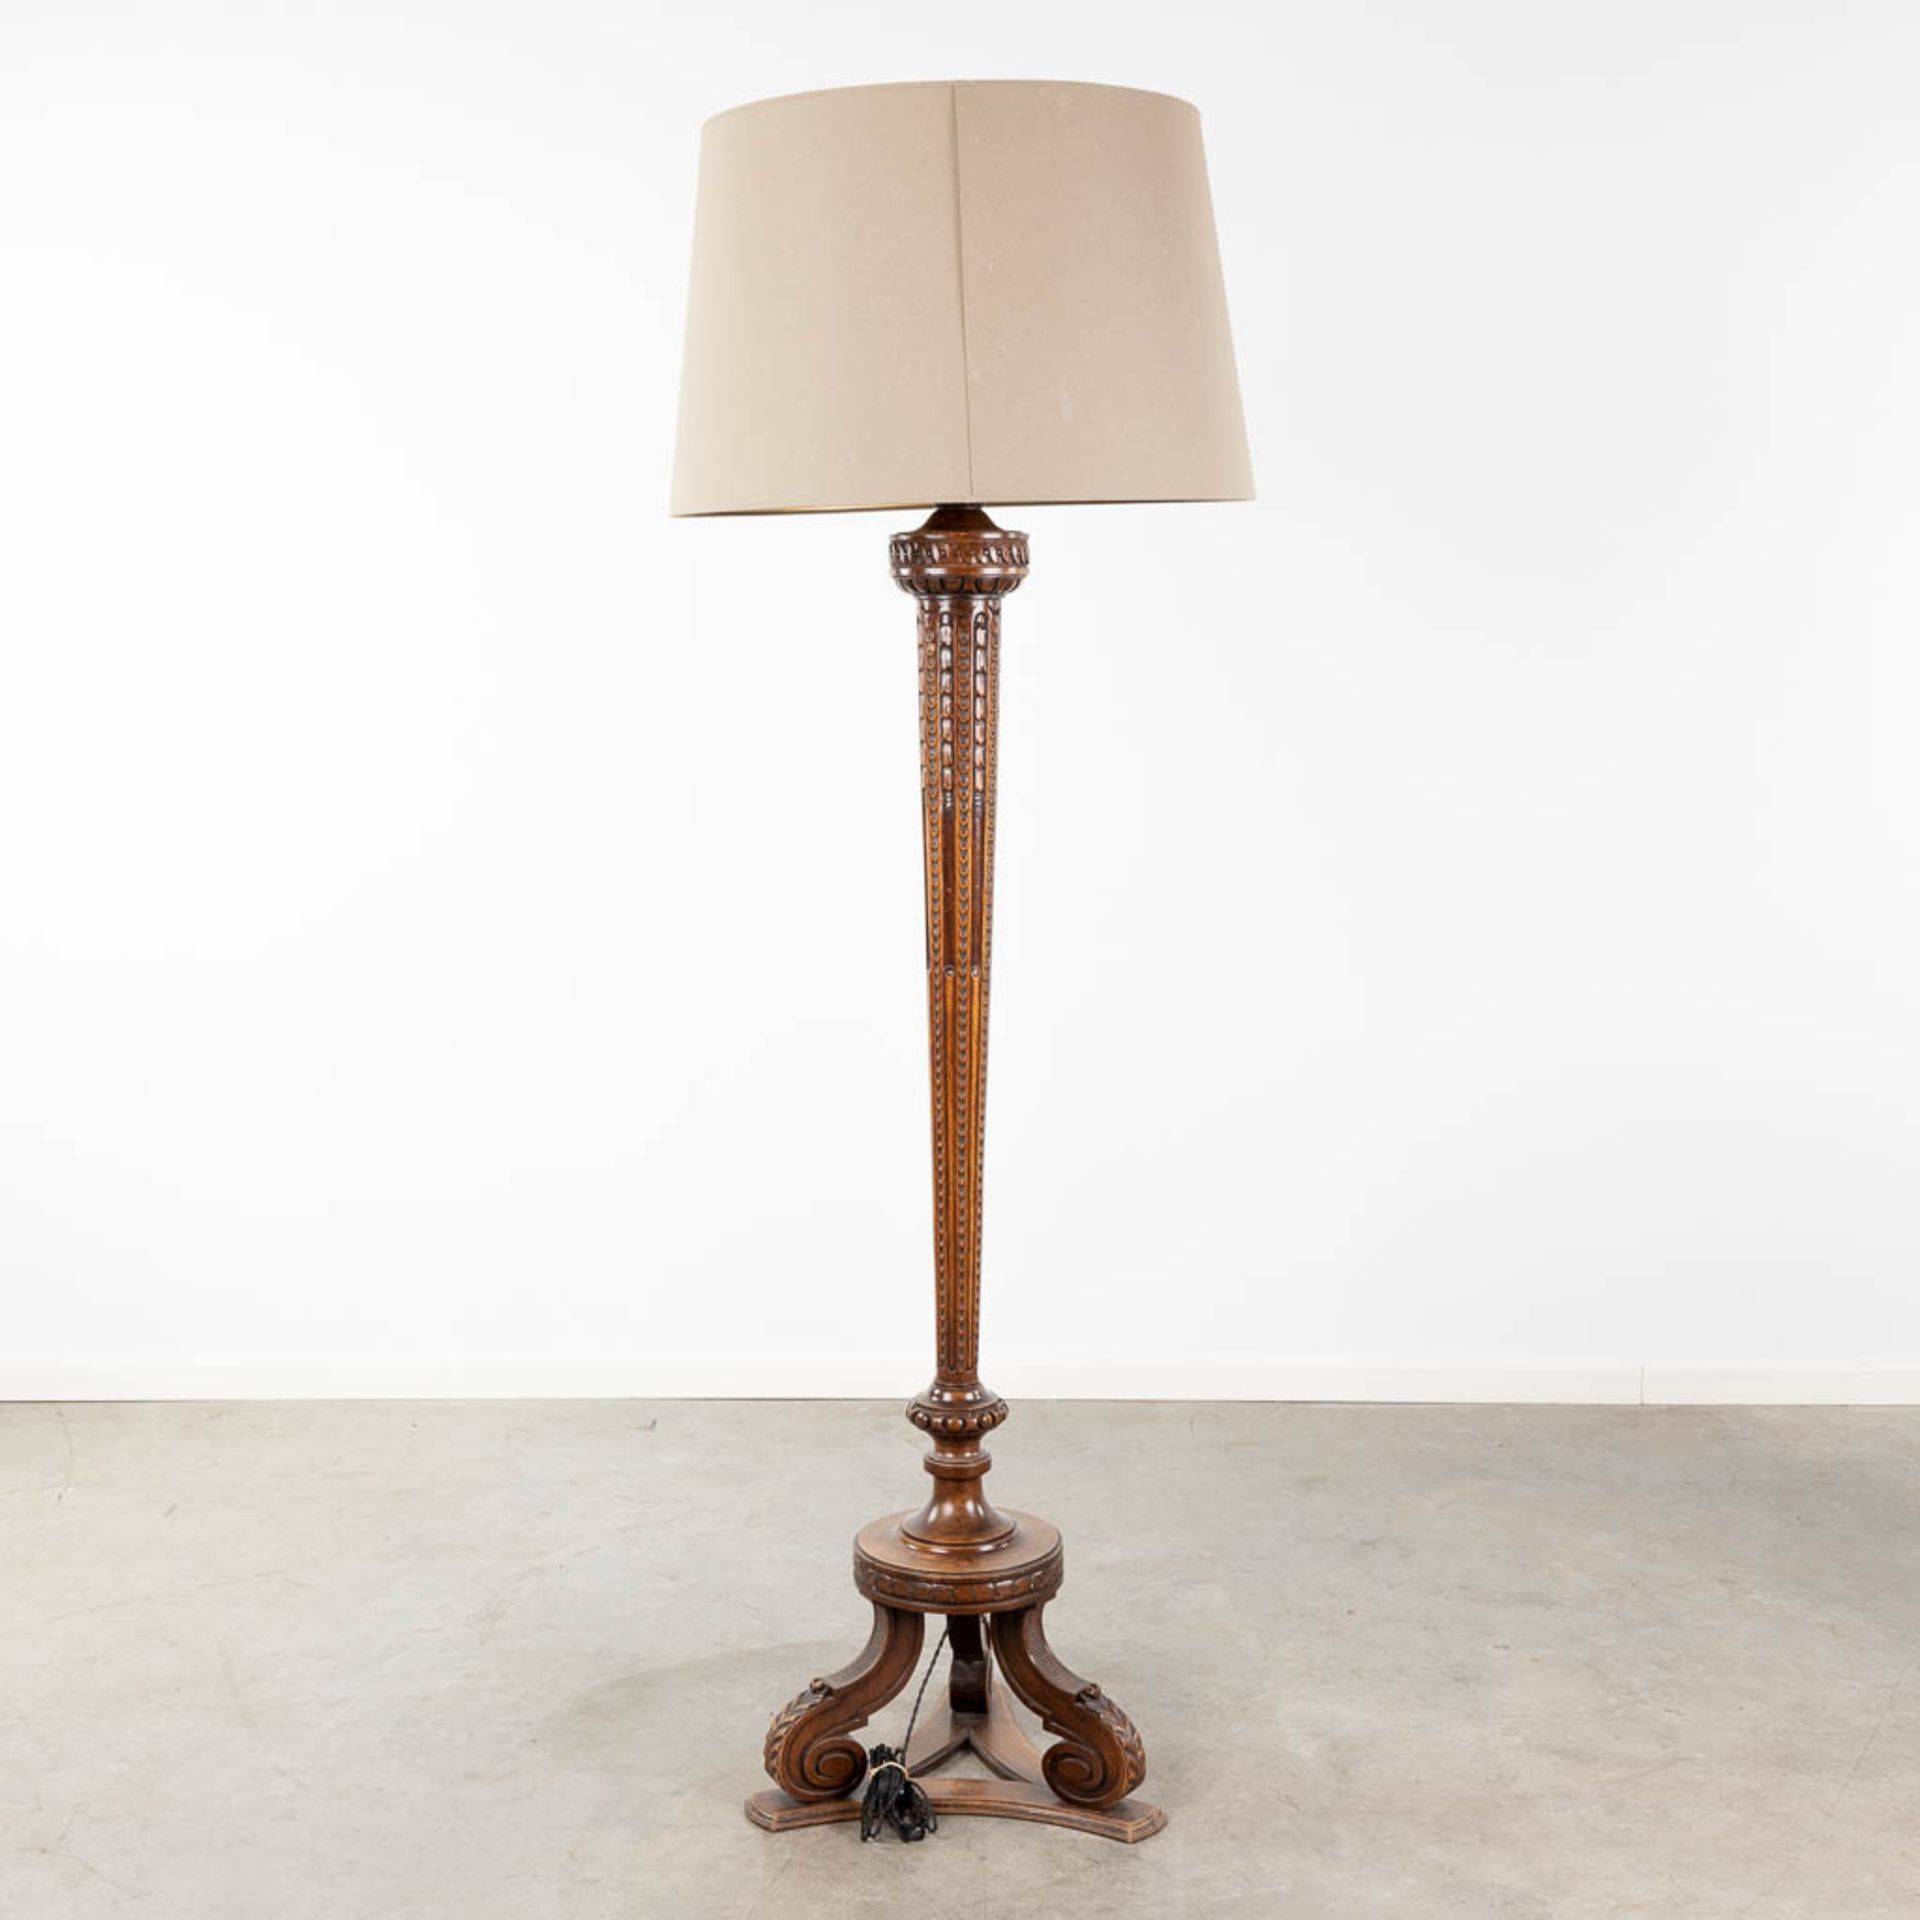 A wood sculptured standing lamp, circa 1920. (L:42 x W:42 x H:188 cm) - Image 4 of 11